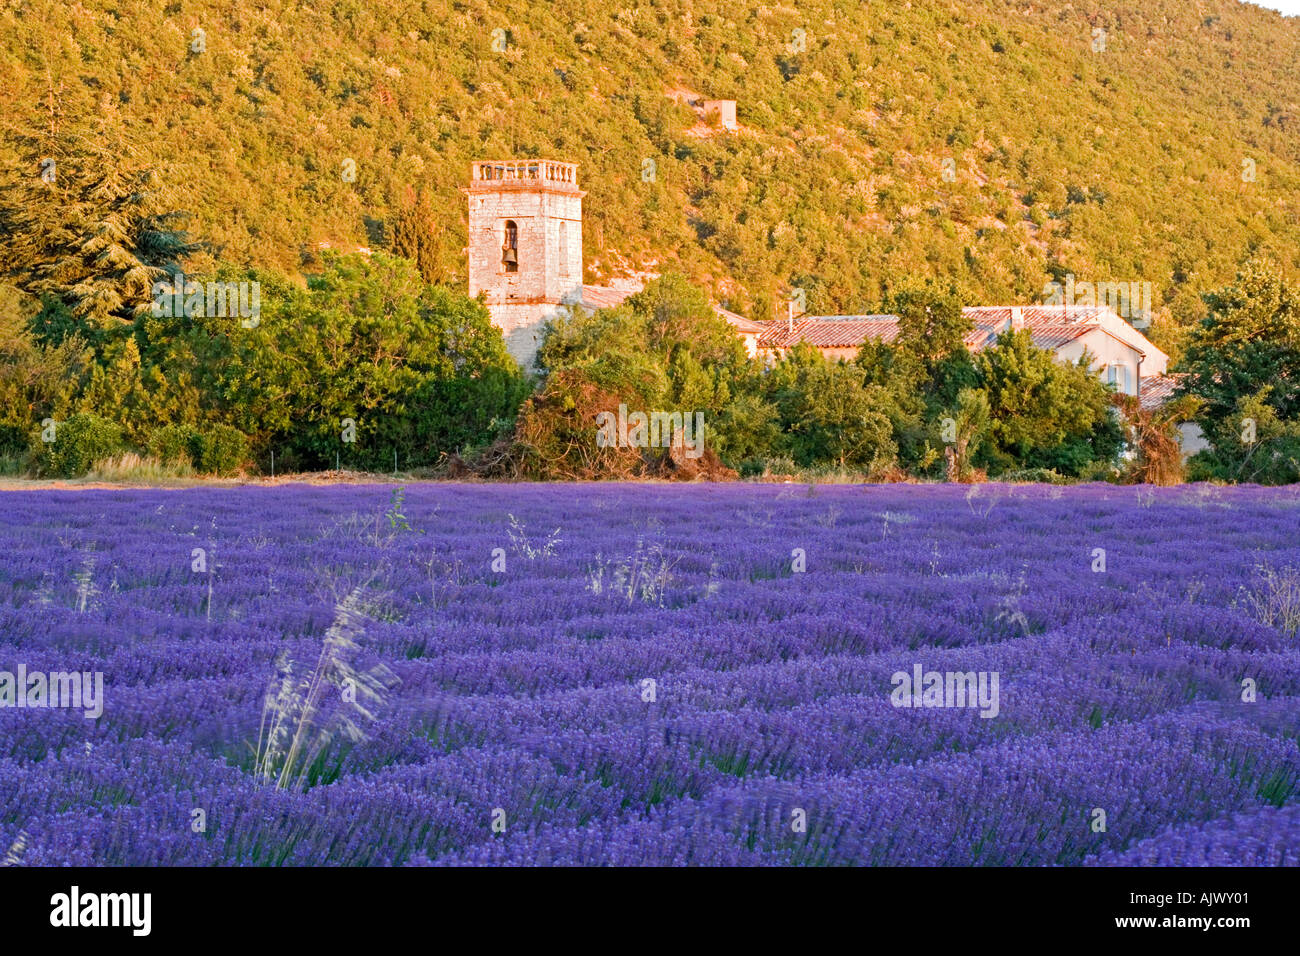 France Provence rural church viewed over lavender field Stock Photo